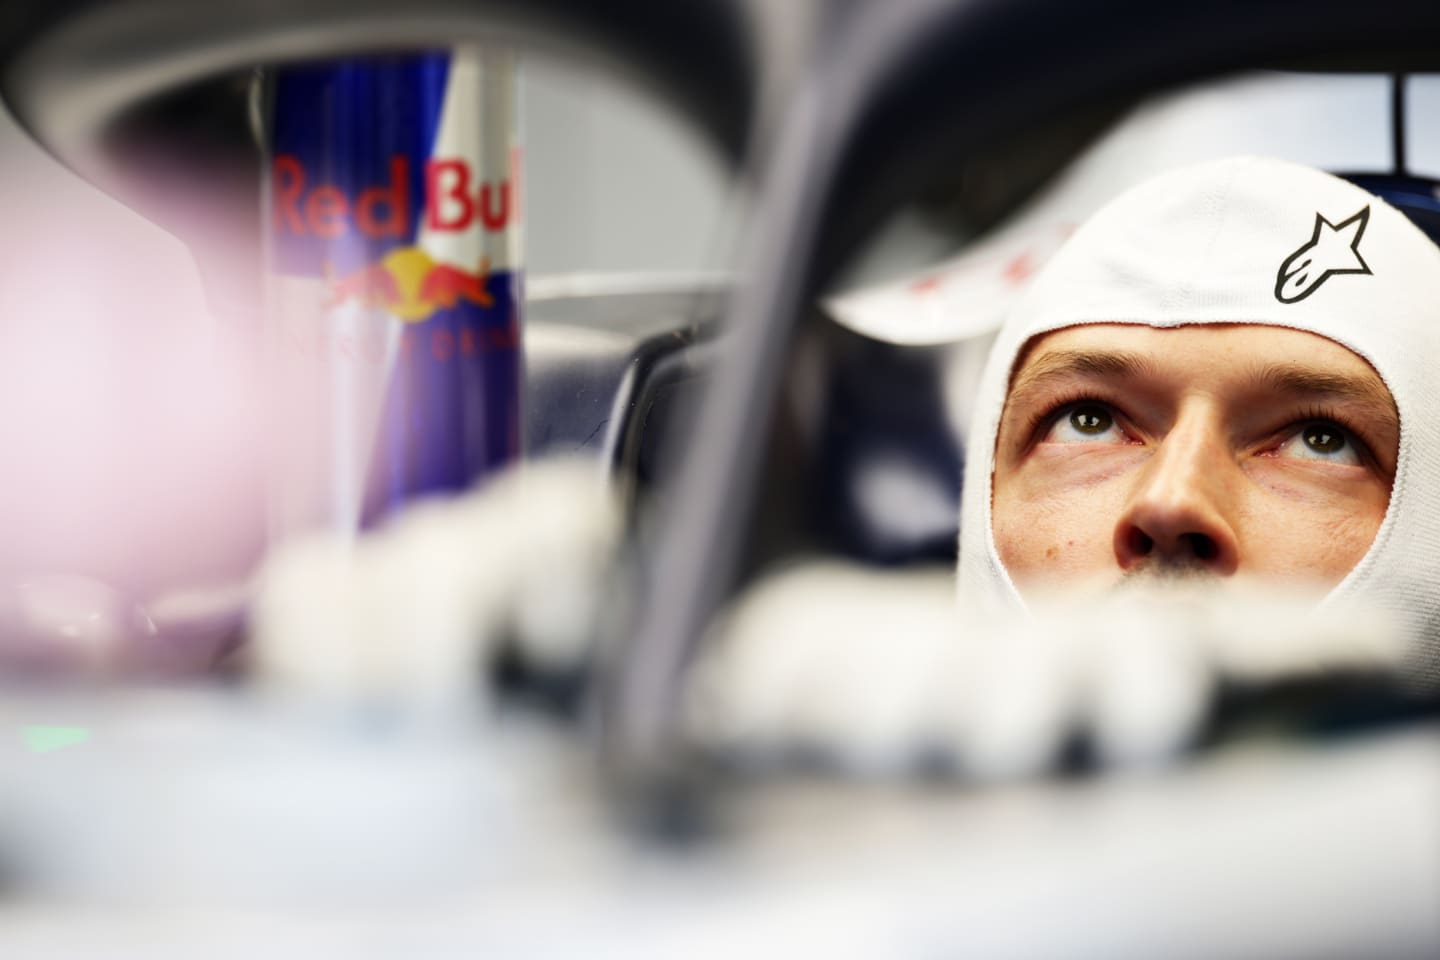 SPA, BELGIUM - AUGUST 28: Daniil Kvyat of Russia and Scuderia AlphaTauri prepares to drive in the garage during practice for the F1 Grand Prix of Belgium at Circuit de Spa-Francorchamps on August 28, 2020 in Spa, Belgium. (Photo by Peter Fox/Getty Images)